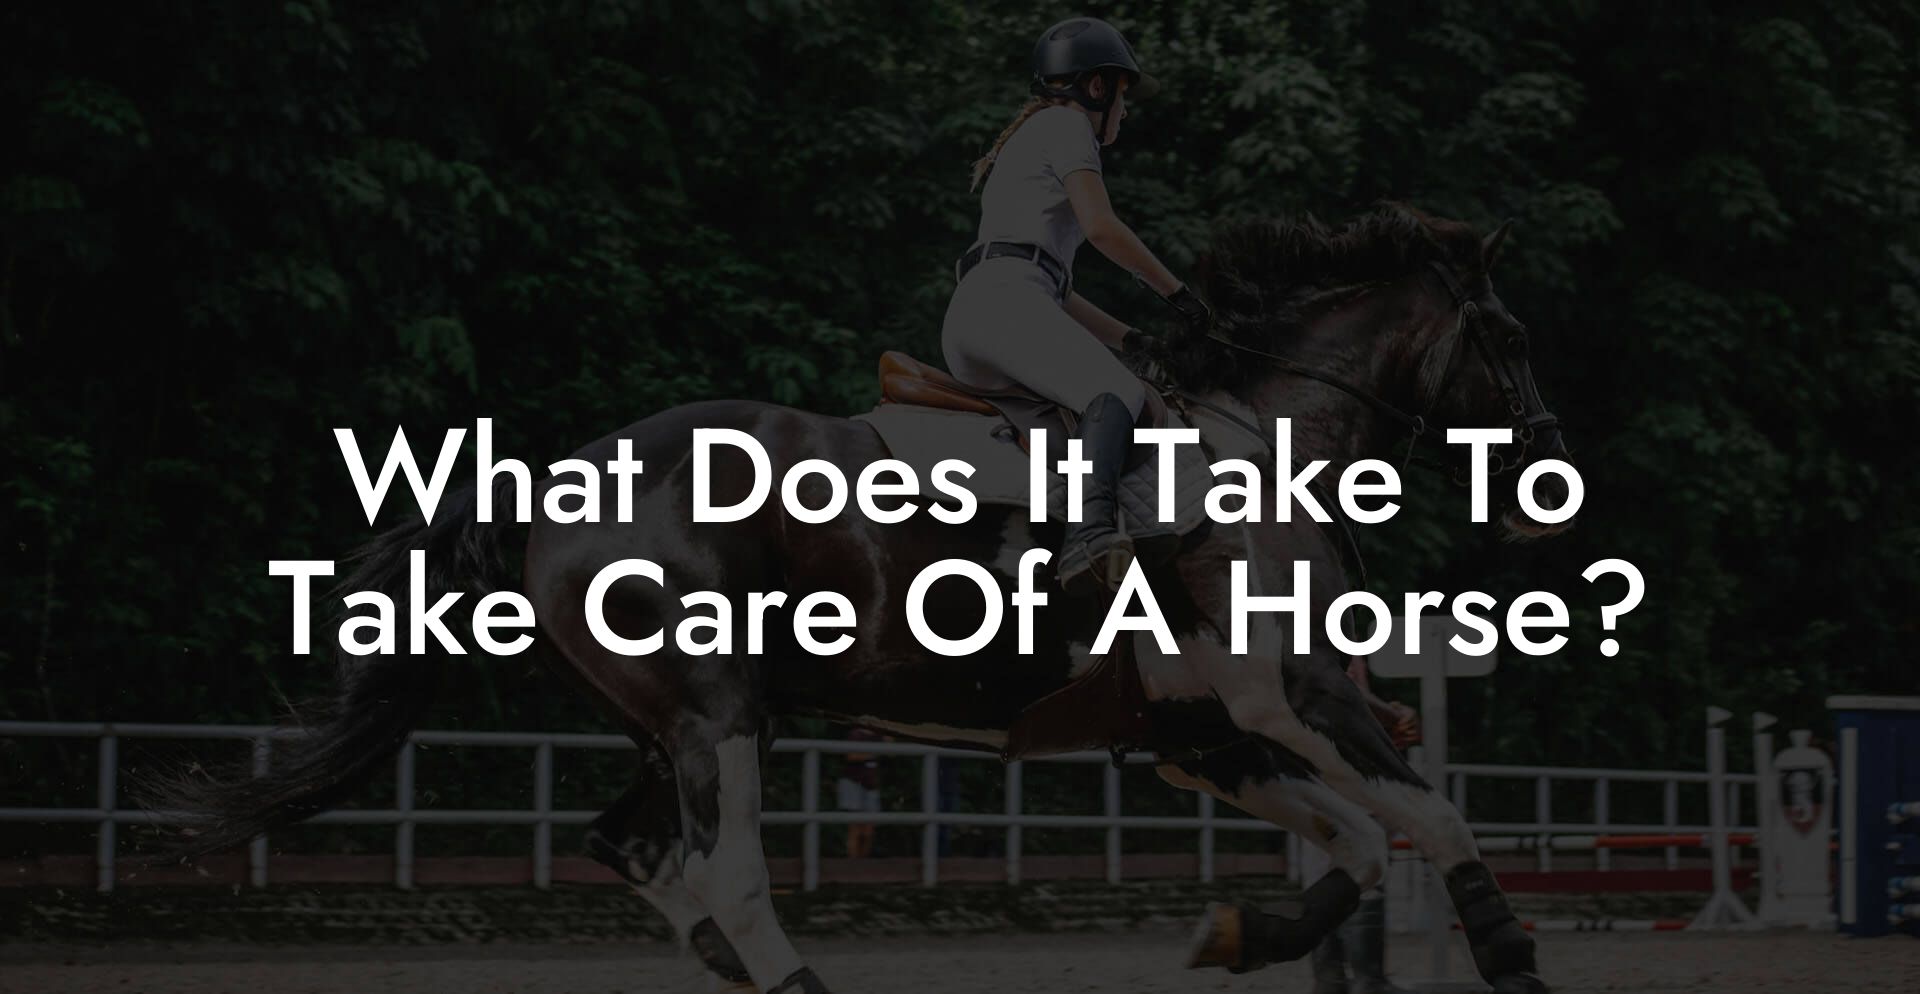 What Does It Take To Take Care Of A Horse?